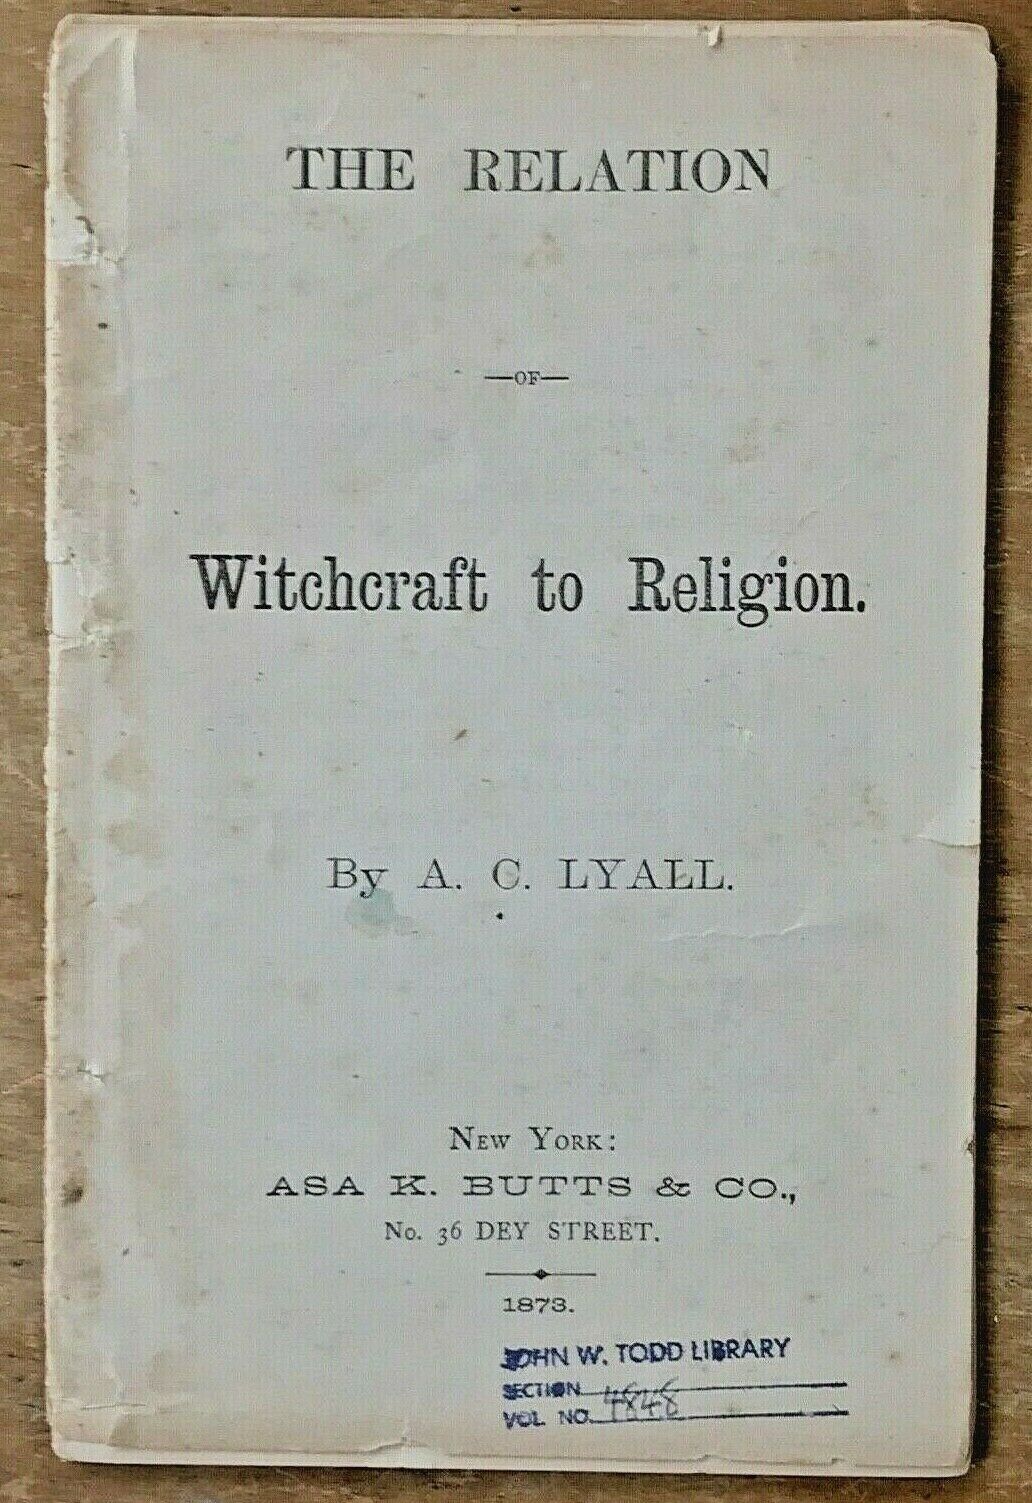 RELATION OF WITCHCRAFT TO RELIGION - Lyall, 1st 1873 - TALISMANS FETISH WITCHES